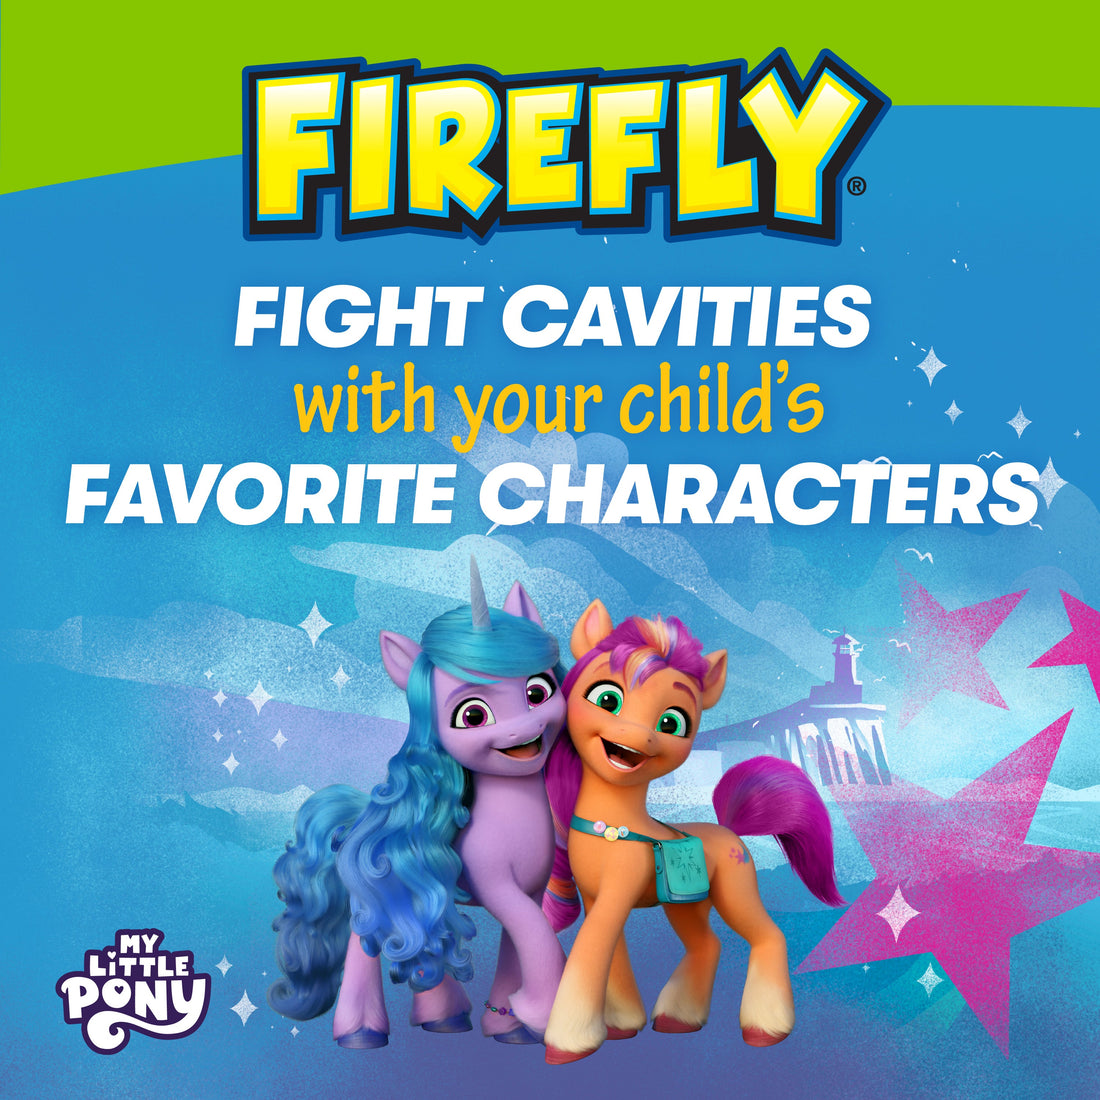 My  little Pony characters. Fight Cavities with your child&